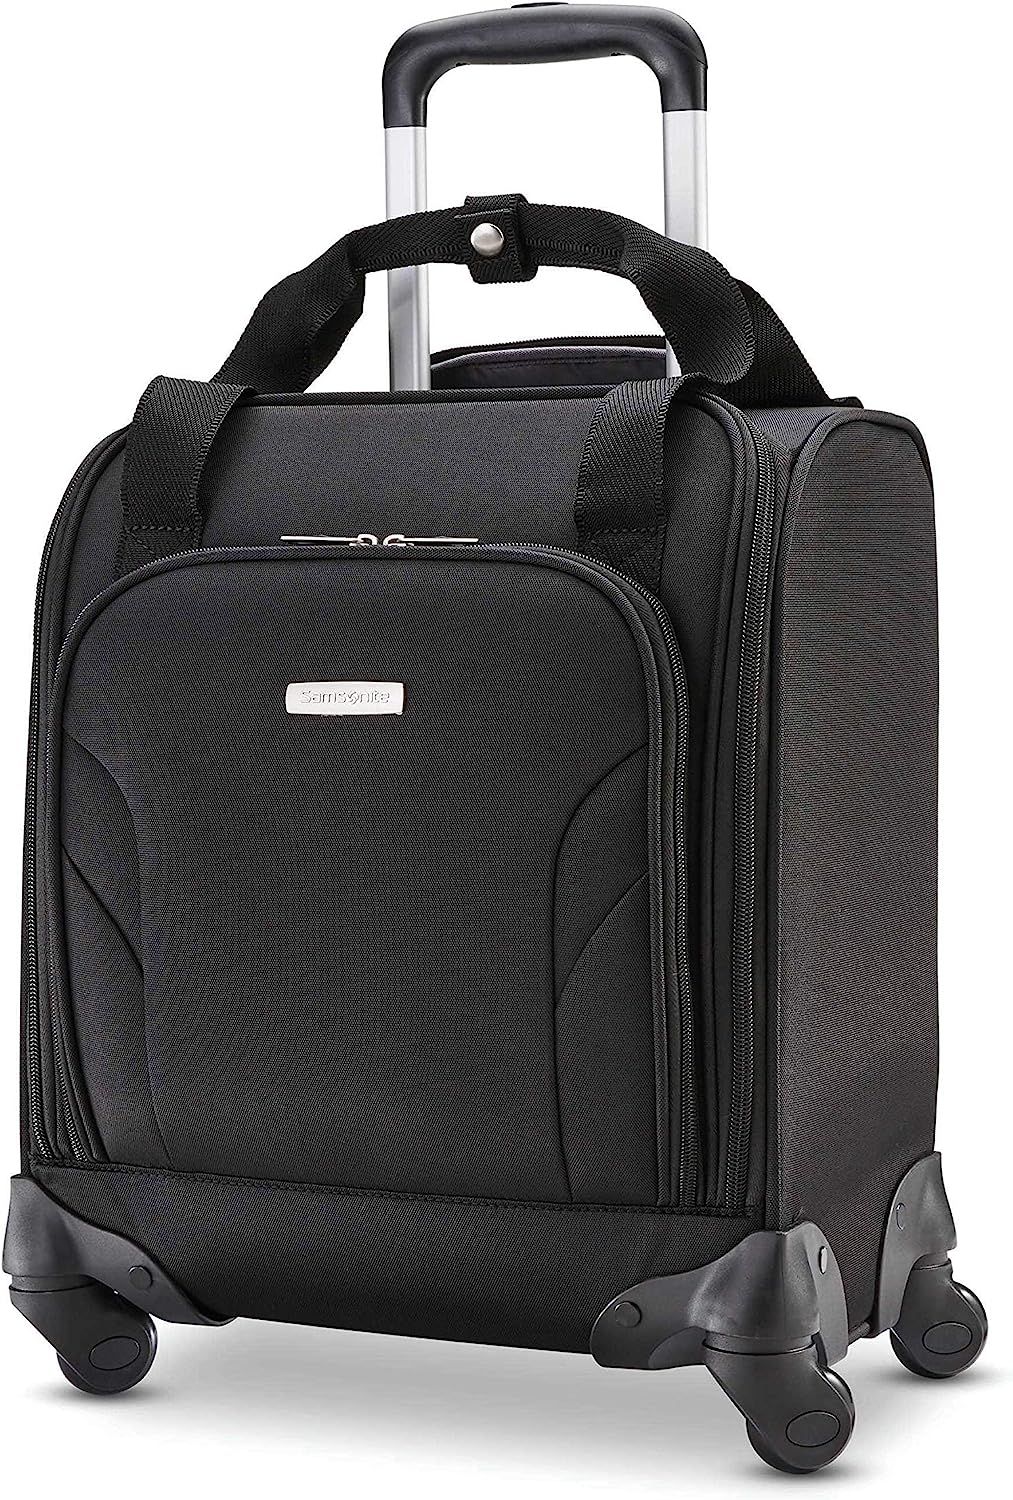 Samsonite Underseat Carry-On Spinner with USB Port, Jet Black, One Size | Amazon (US)